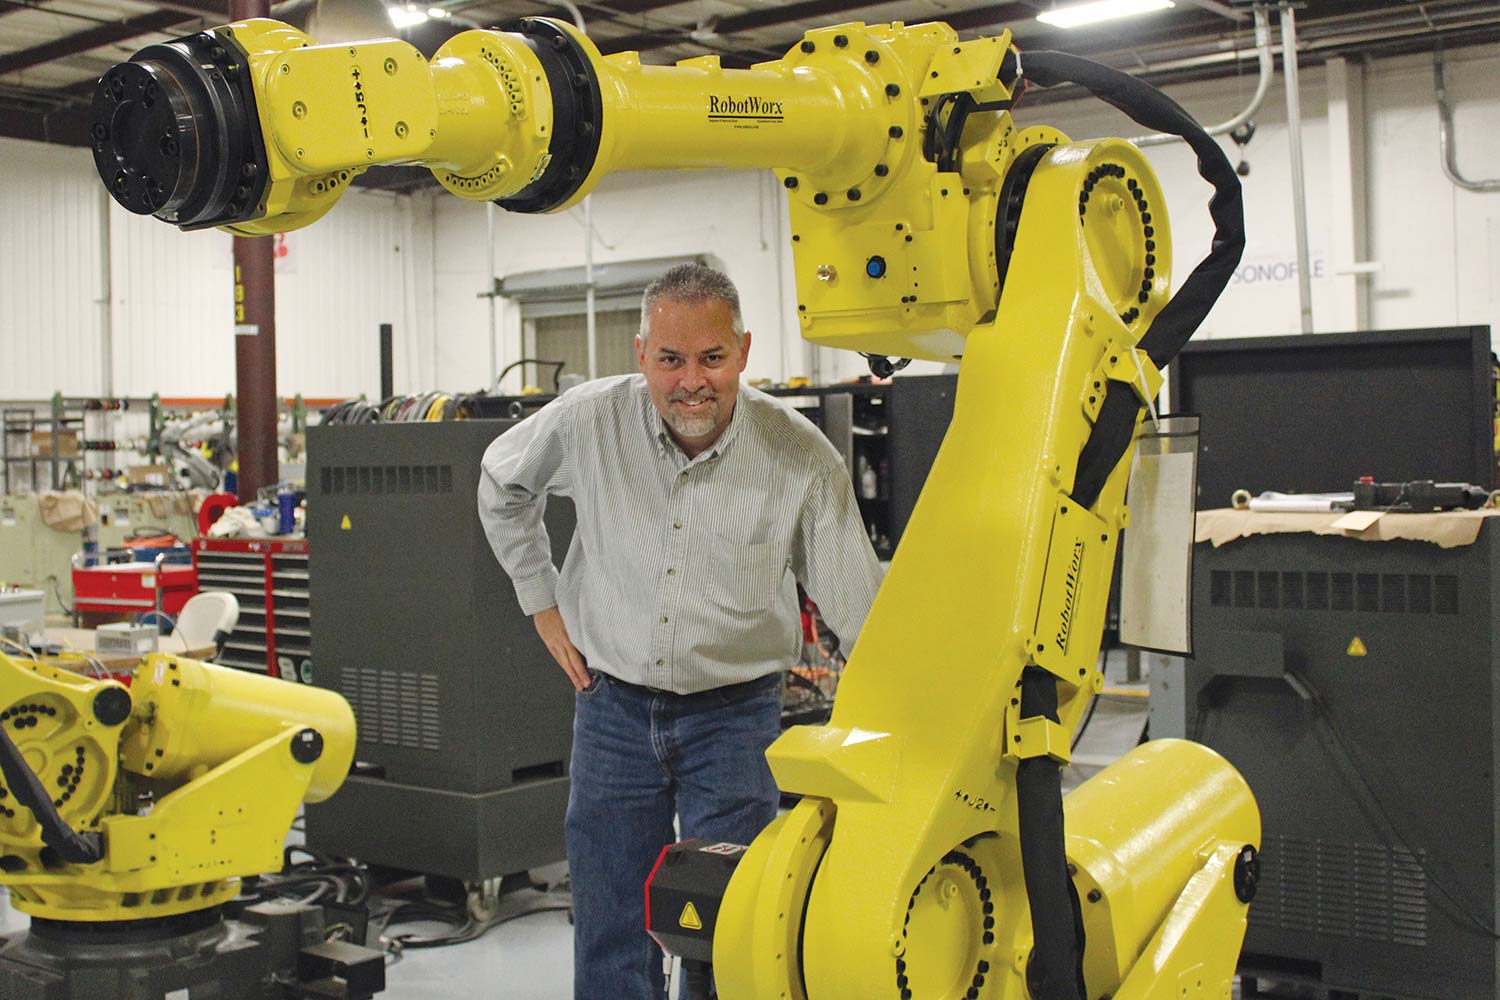 Chris Hurd, a Cazenovia High School technology teacher, is pictured at the Ohio factory Robotworx, where he went for training in using a robotic arm. (The one used in the classroom is much smaller.)